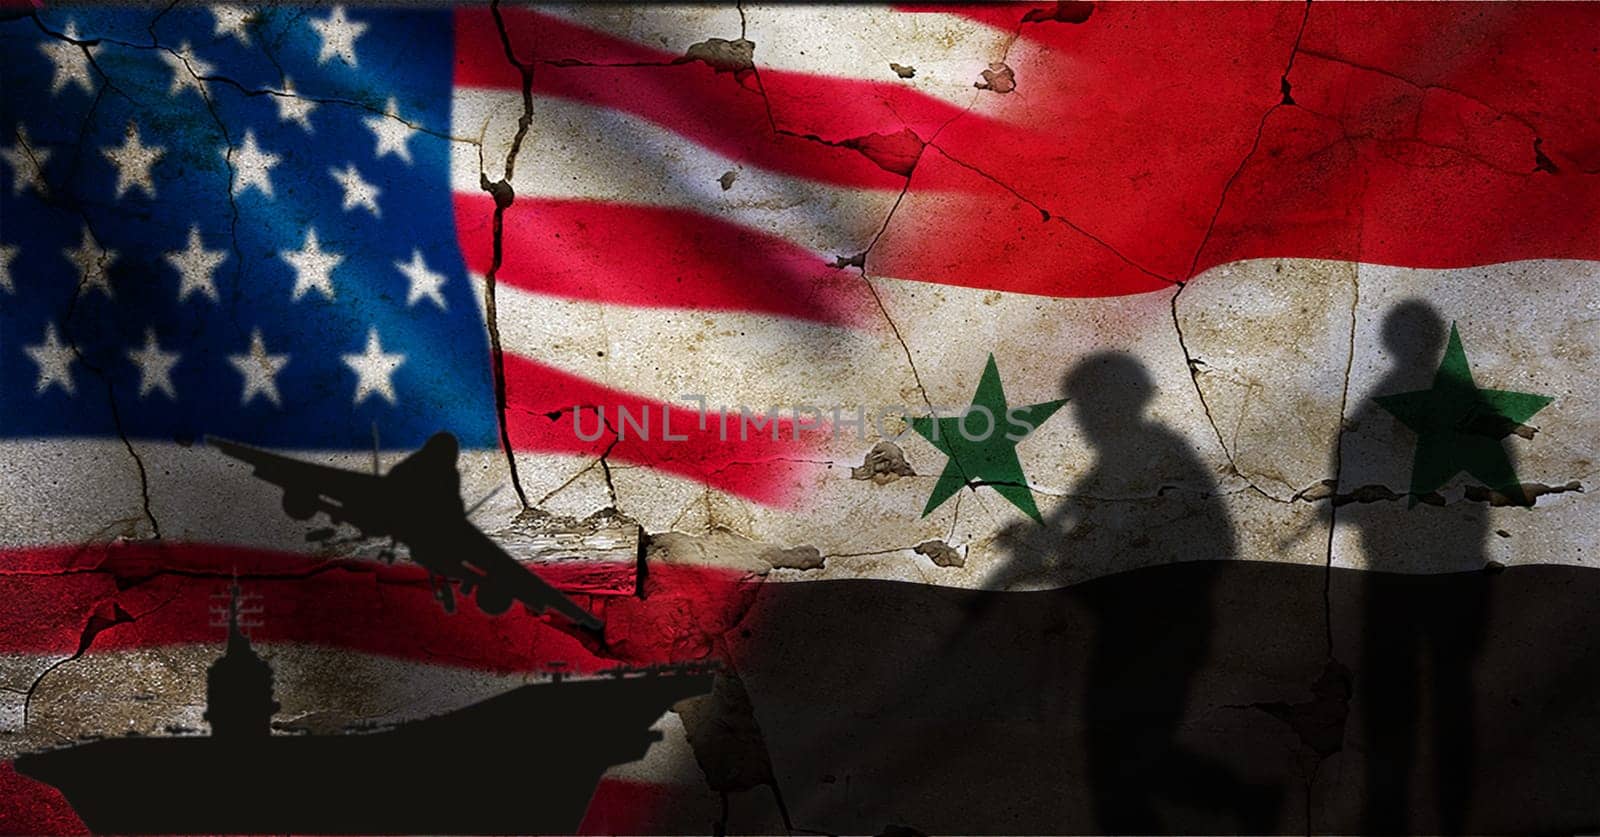 Conflict between USA and Syria concept. Political tension between the USA and Syria. United States vs Syria flag on cracked wall by isaiphoto